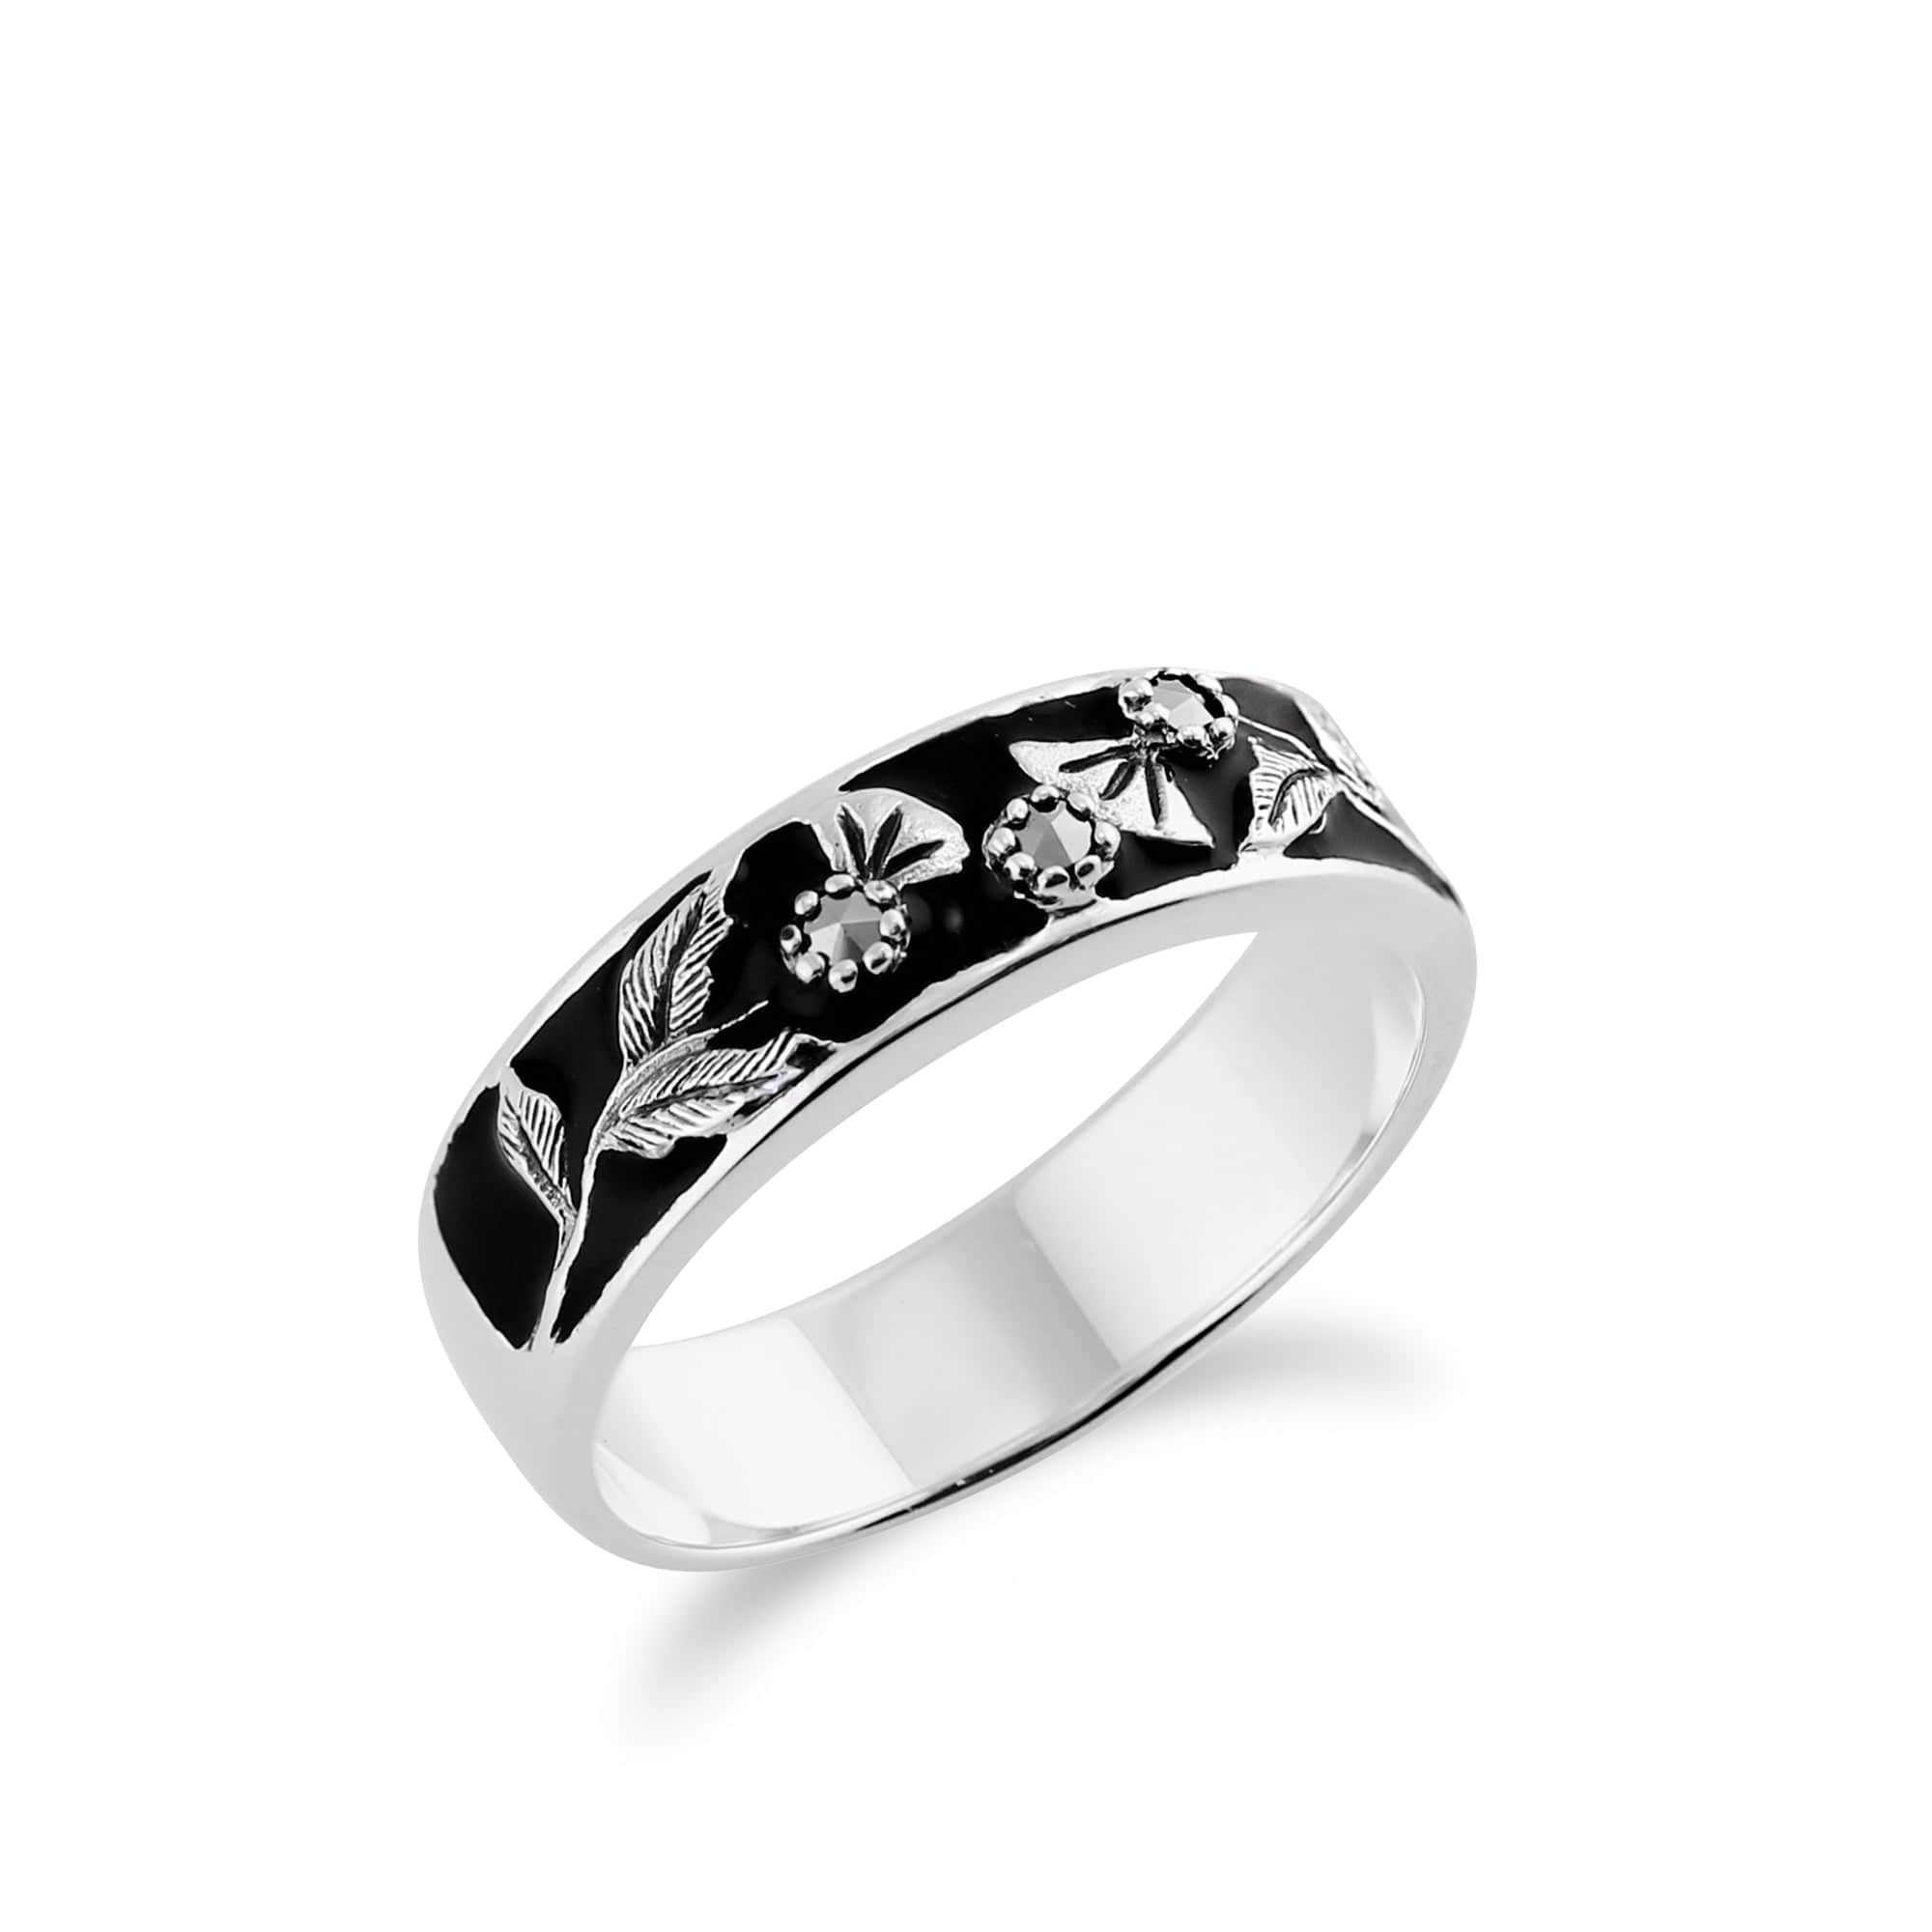 214R471402925 Floral Round Marcasite & Black Enamel Thisstle Band Ring in 925 Sterling Silver 2